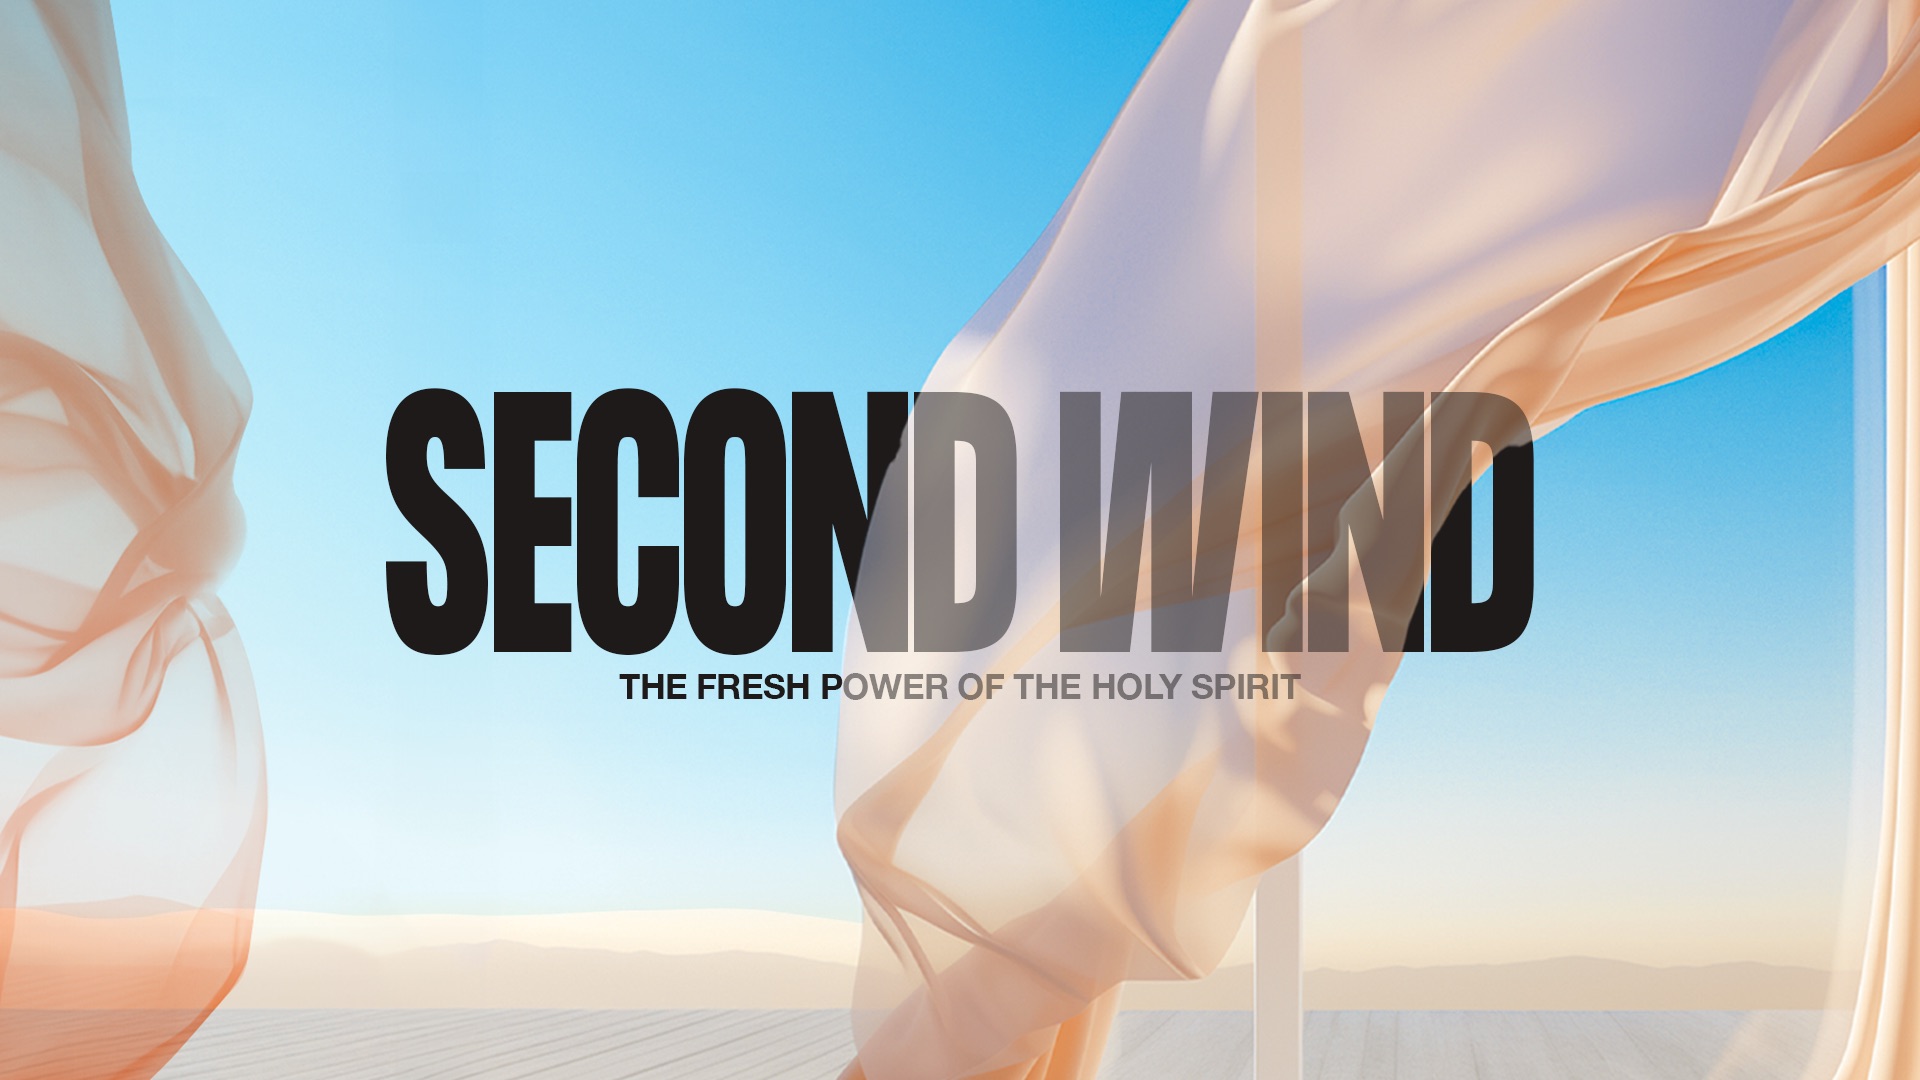 Current Message Series: Second Wind Image